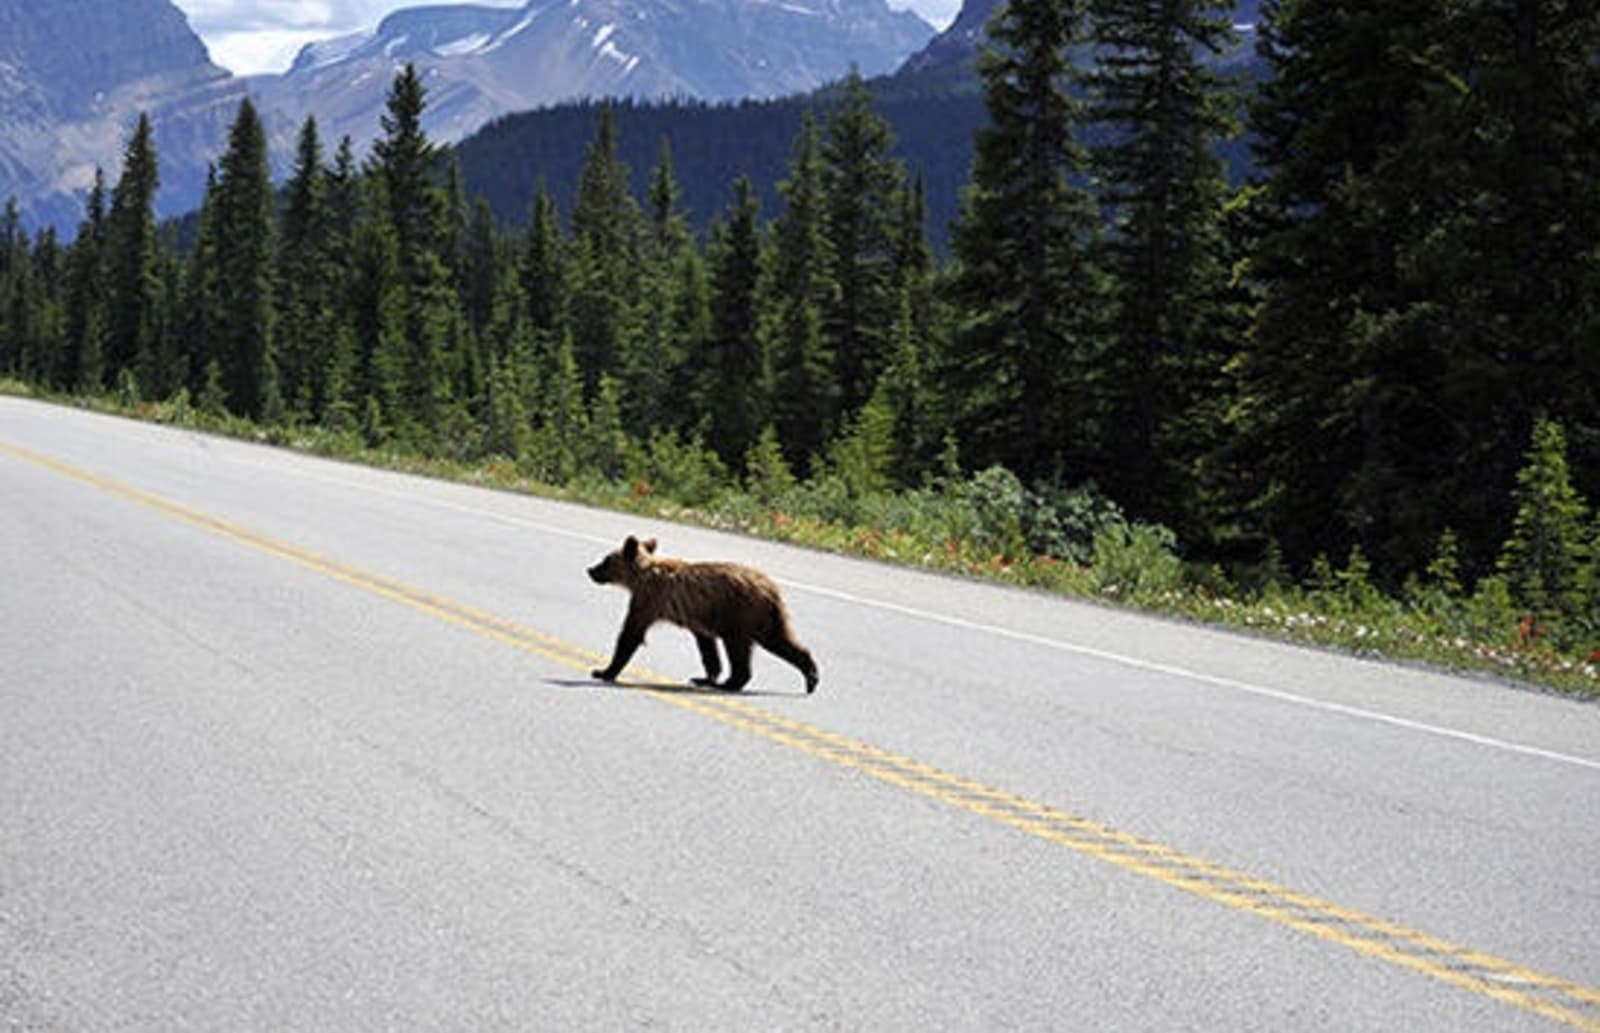 Baby bear walks across a road with mountains in the background.